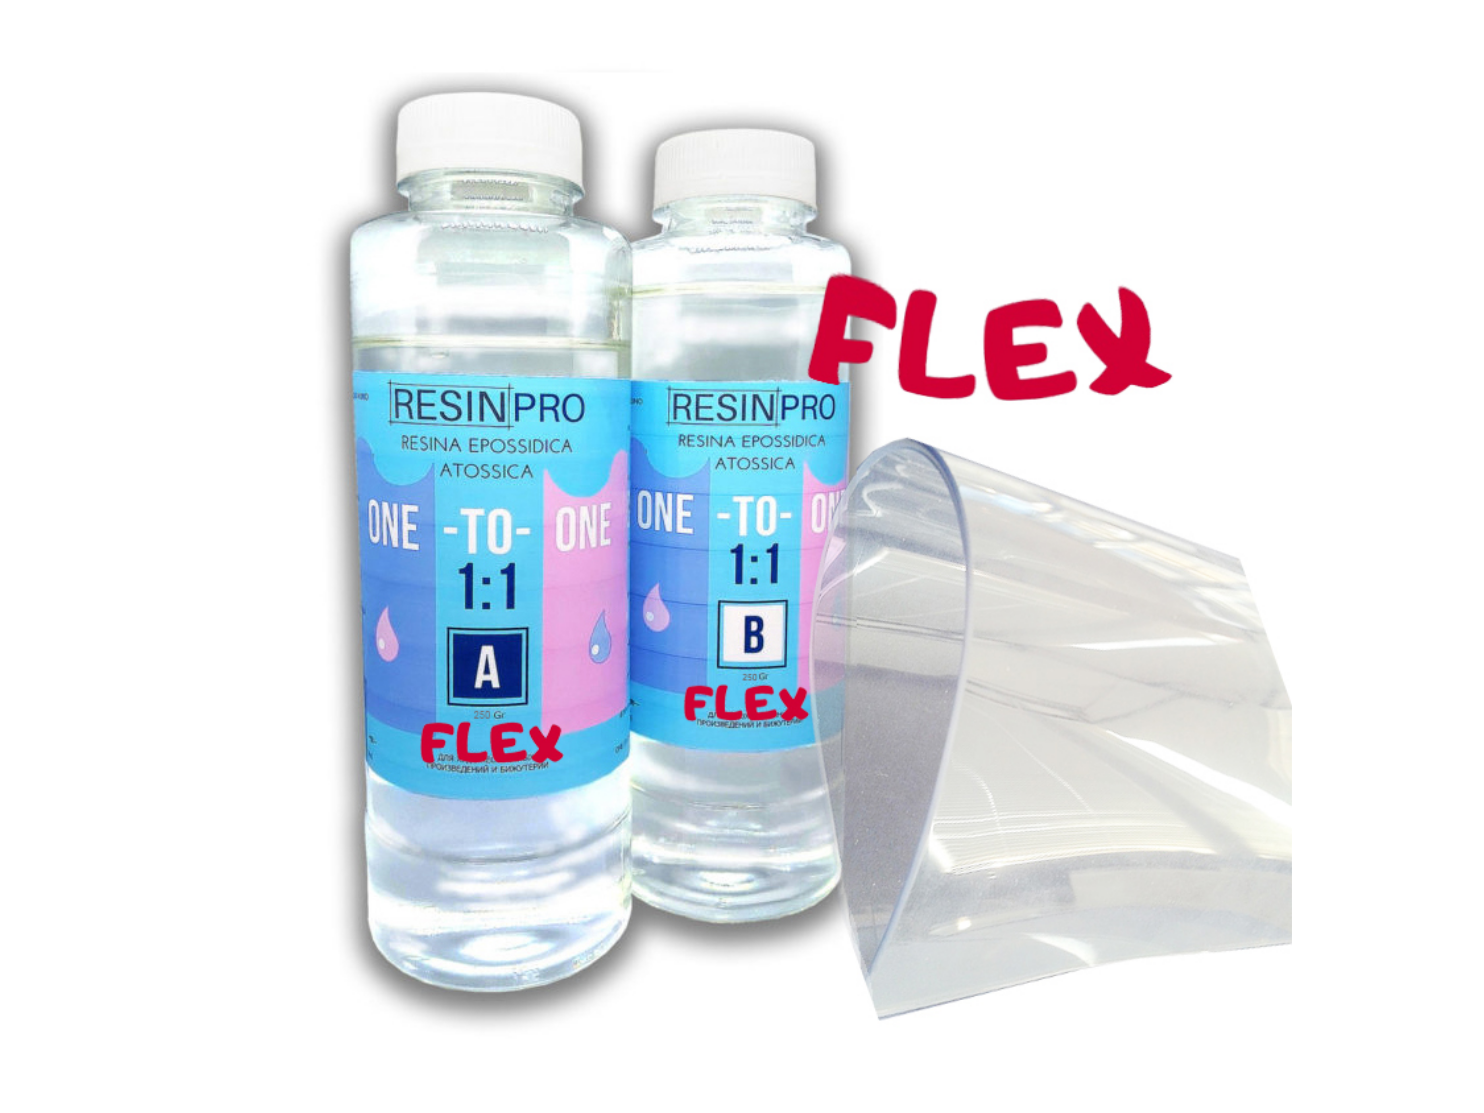 Resinpro ONE TO ONE 1:1 FLEX  Resina trasp. flessibile atossica